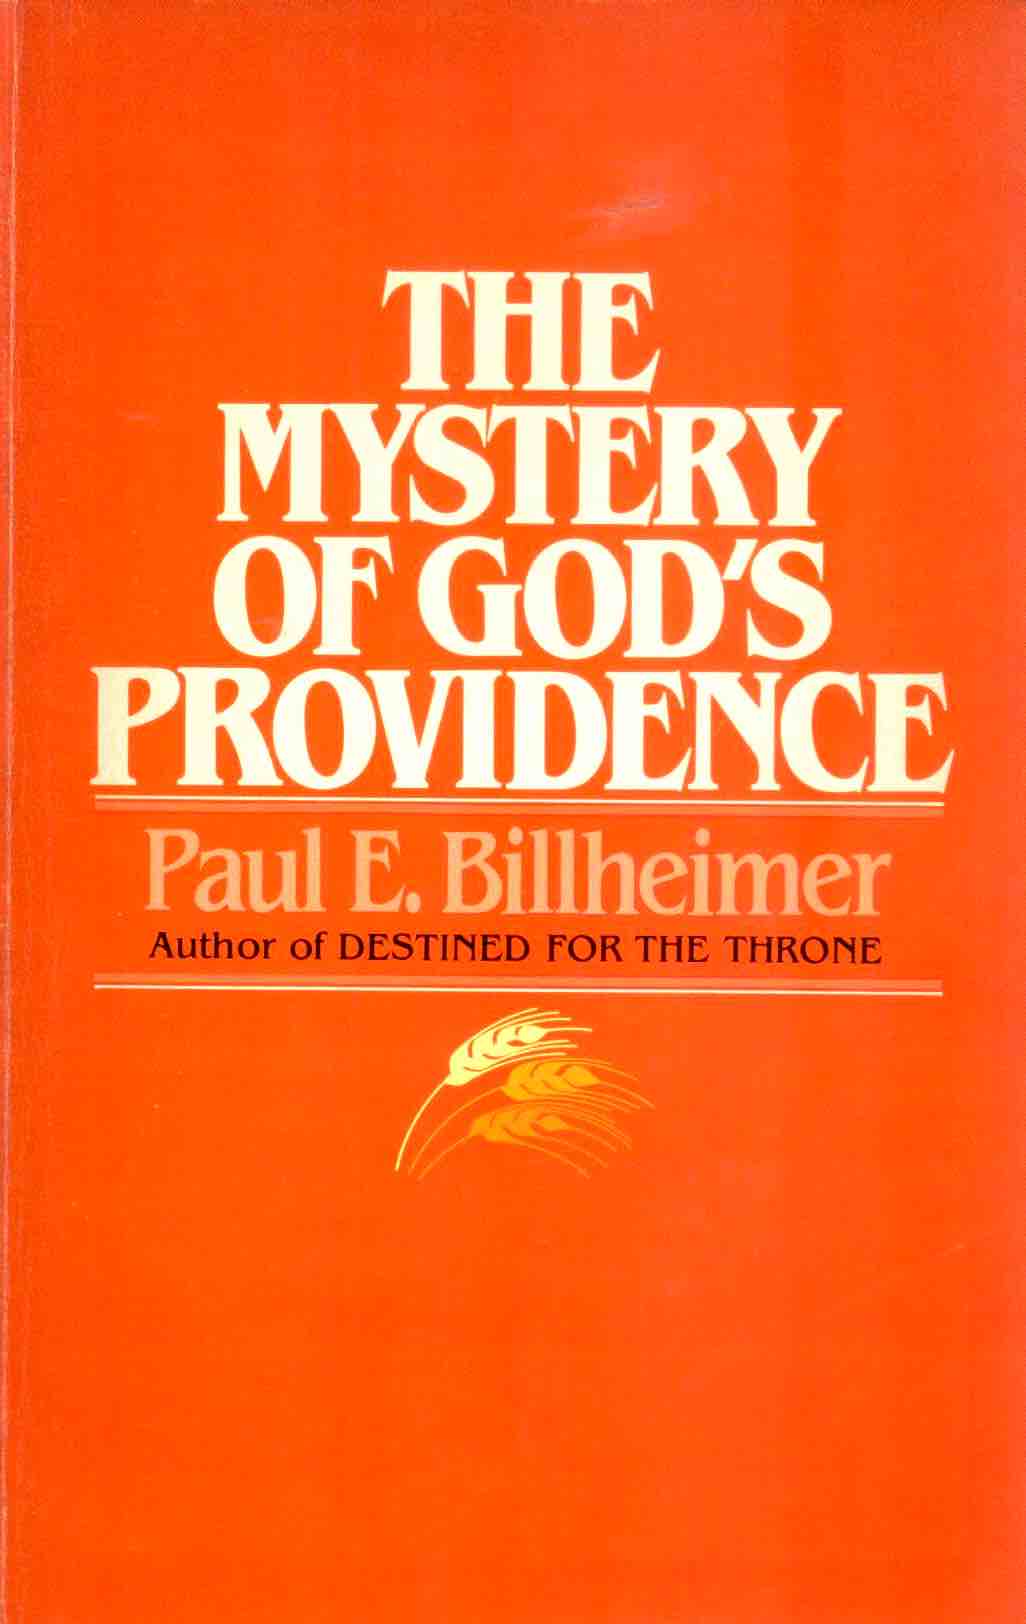 Cover of the Mystery of God's Providence